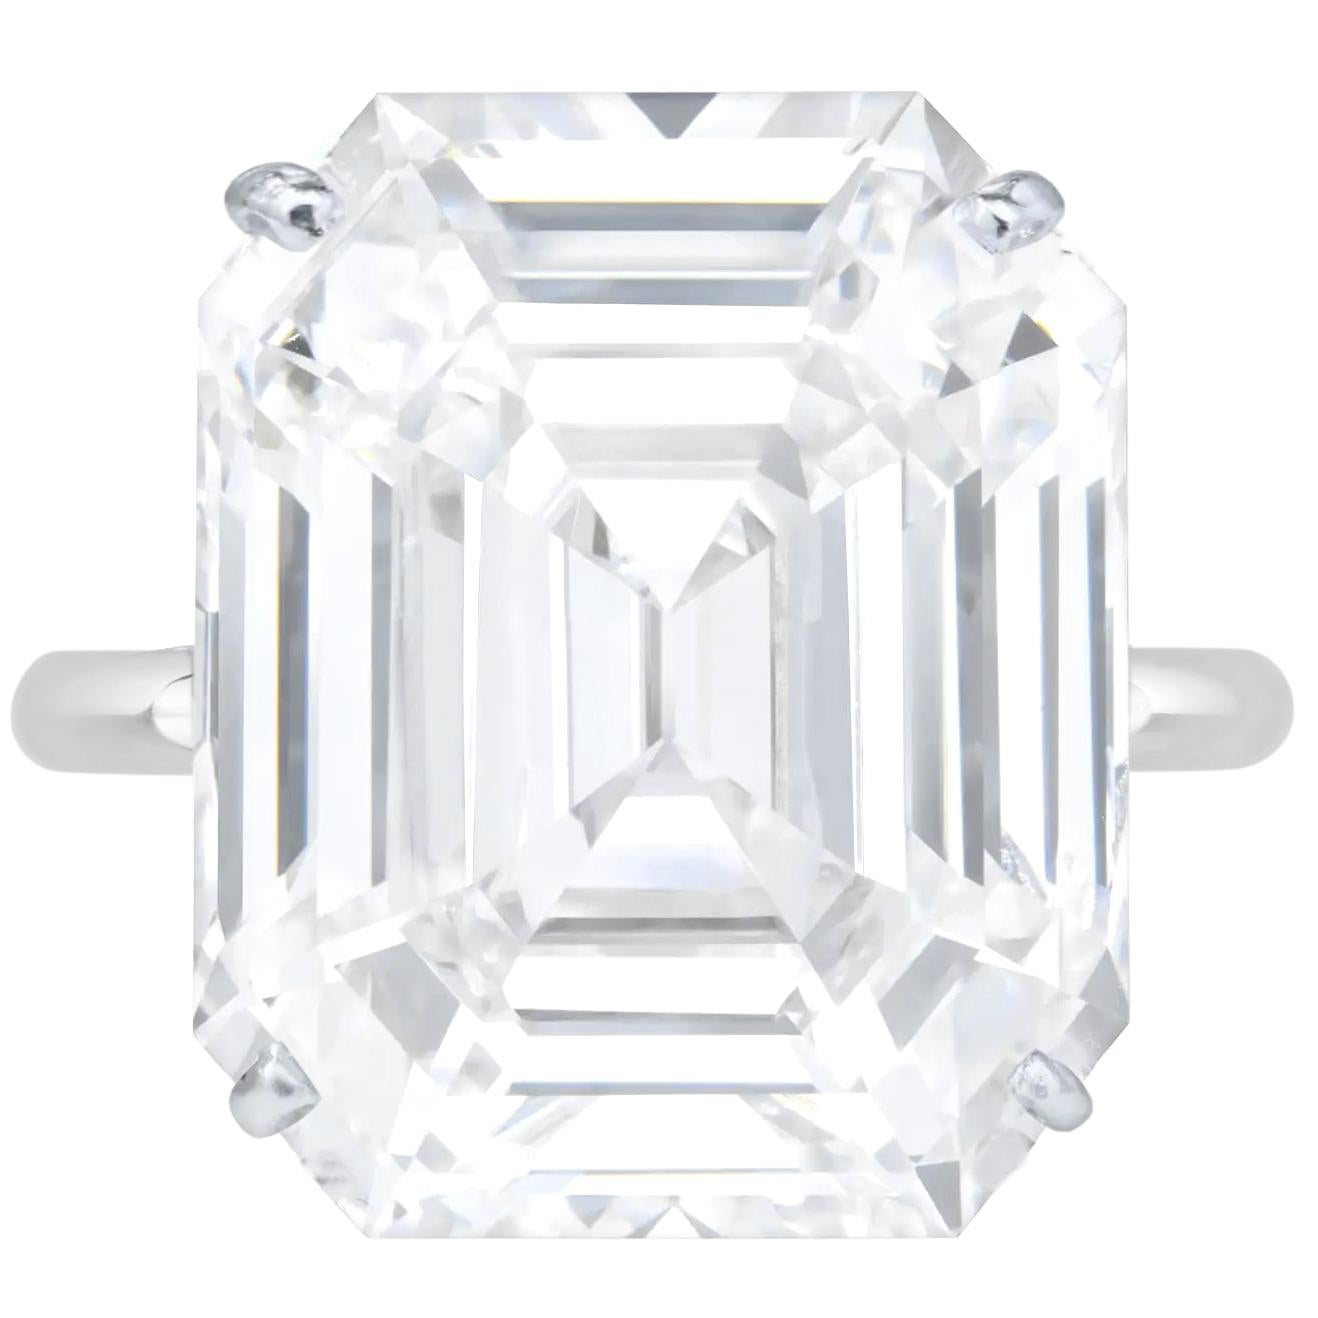 EXCEPTIONAL GIA Certified 10 Carat  Emerald Cut Diamond Ring

One the most beautiful investment grade diamonds we have in stock